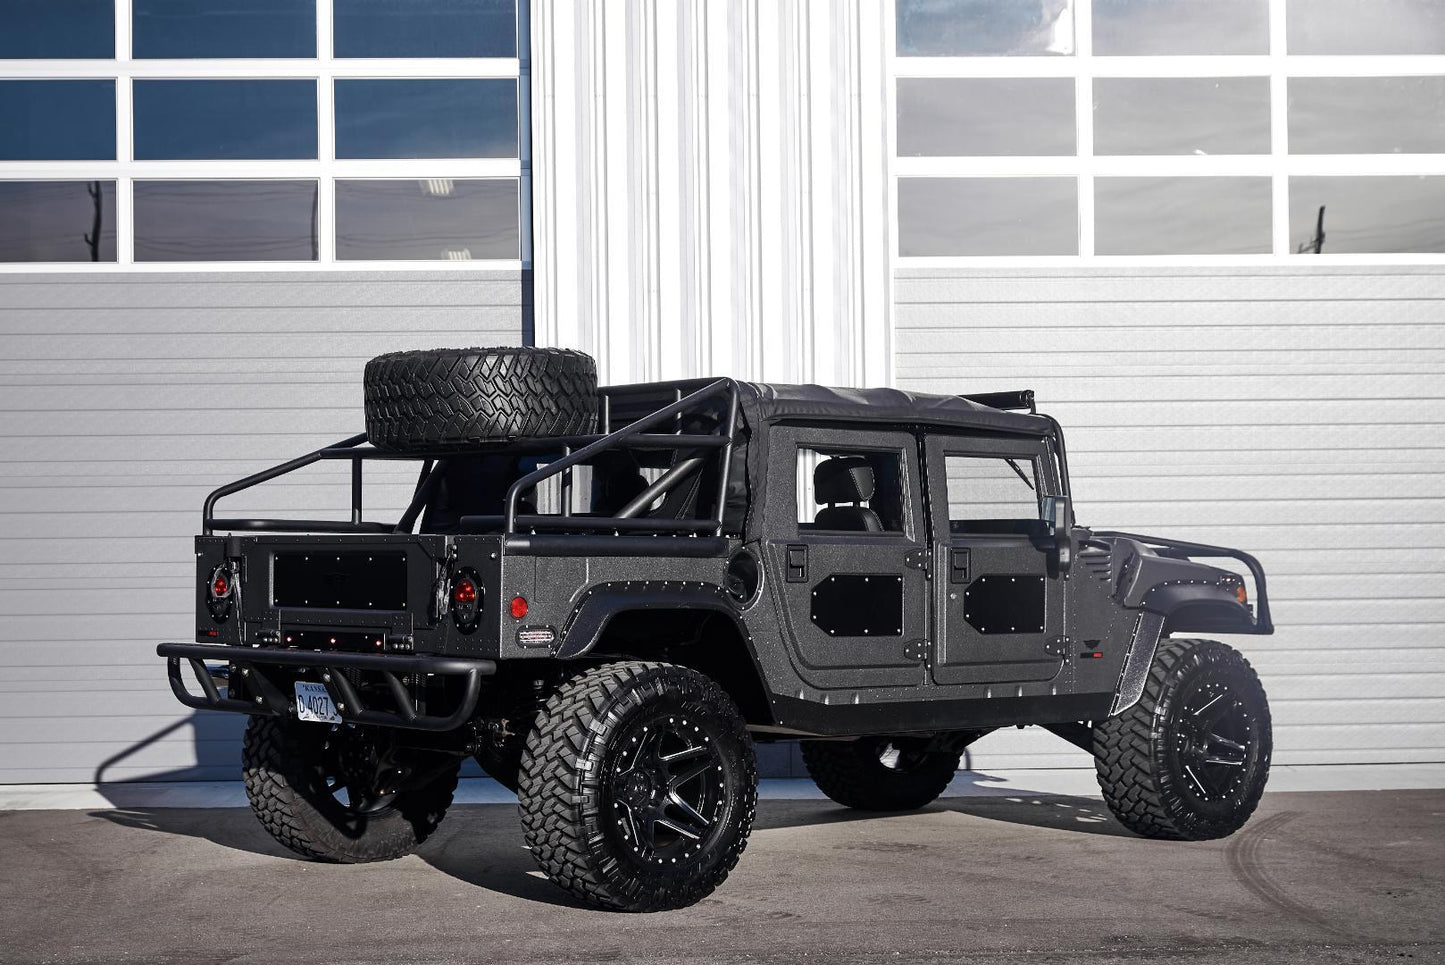 Mil-Spec Auto Hummer H1 "Launch Edition" - TheArsenale